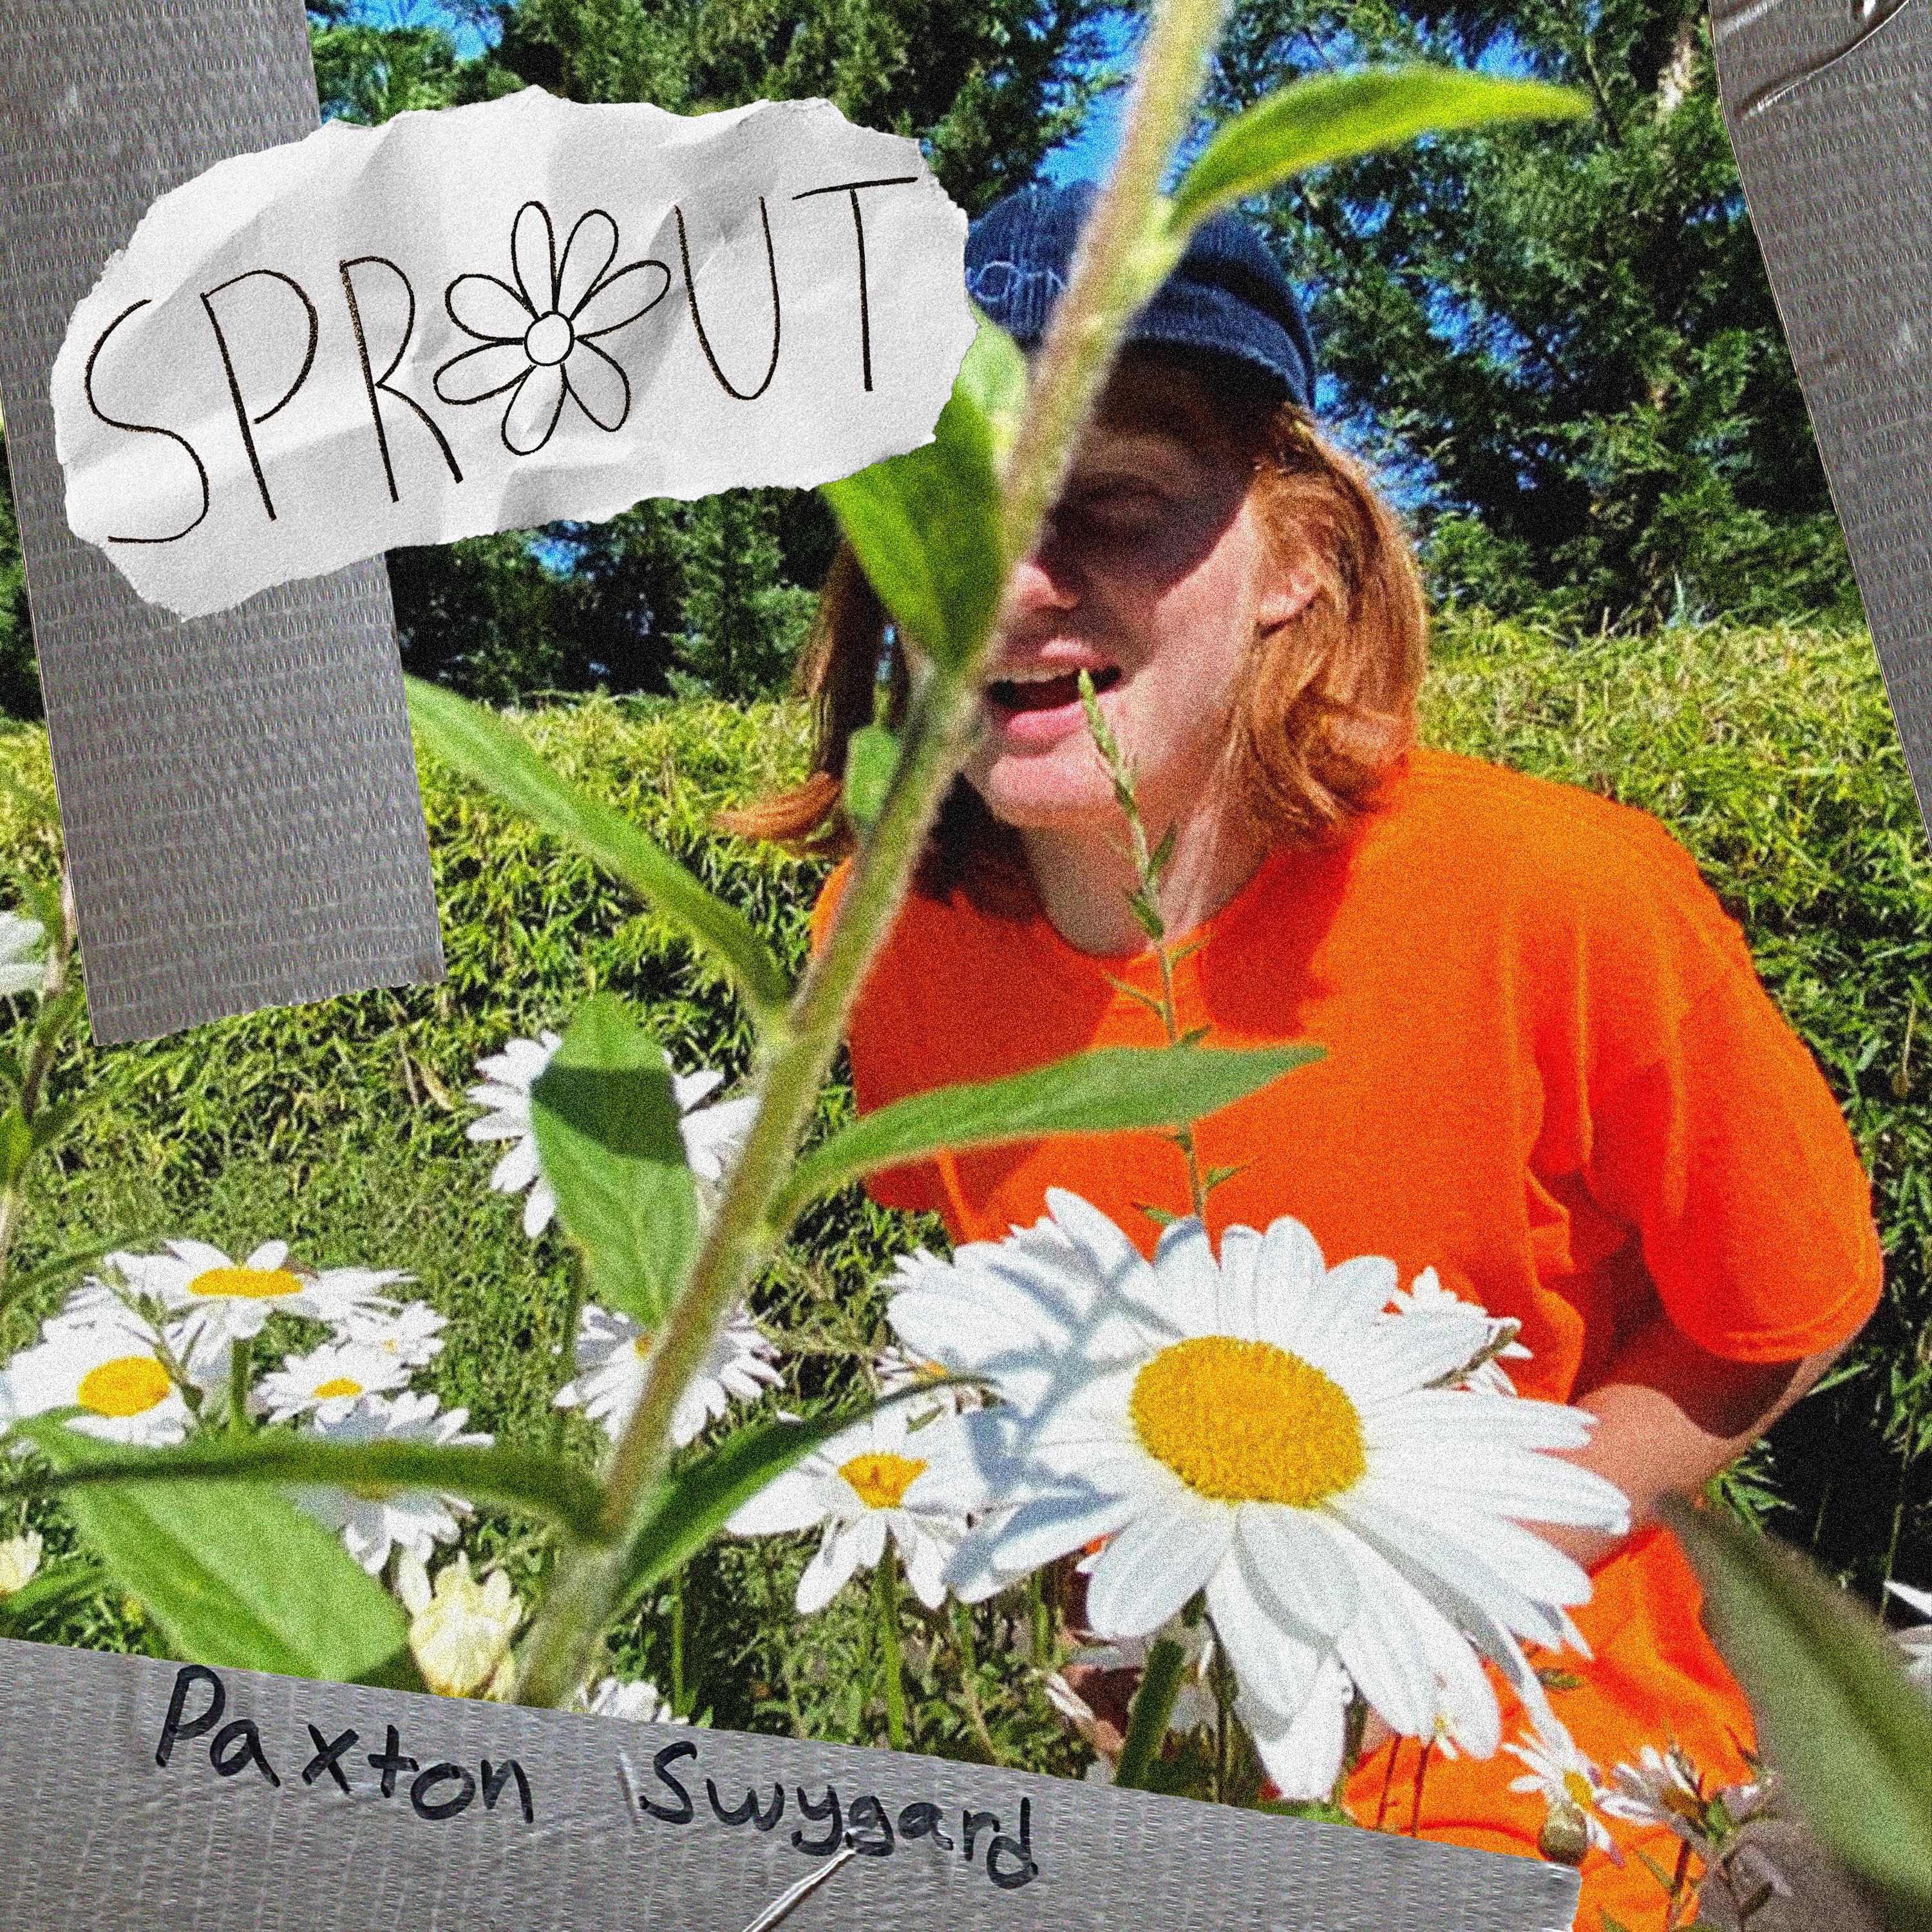 Paxton Swygard - Sprout